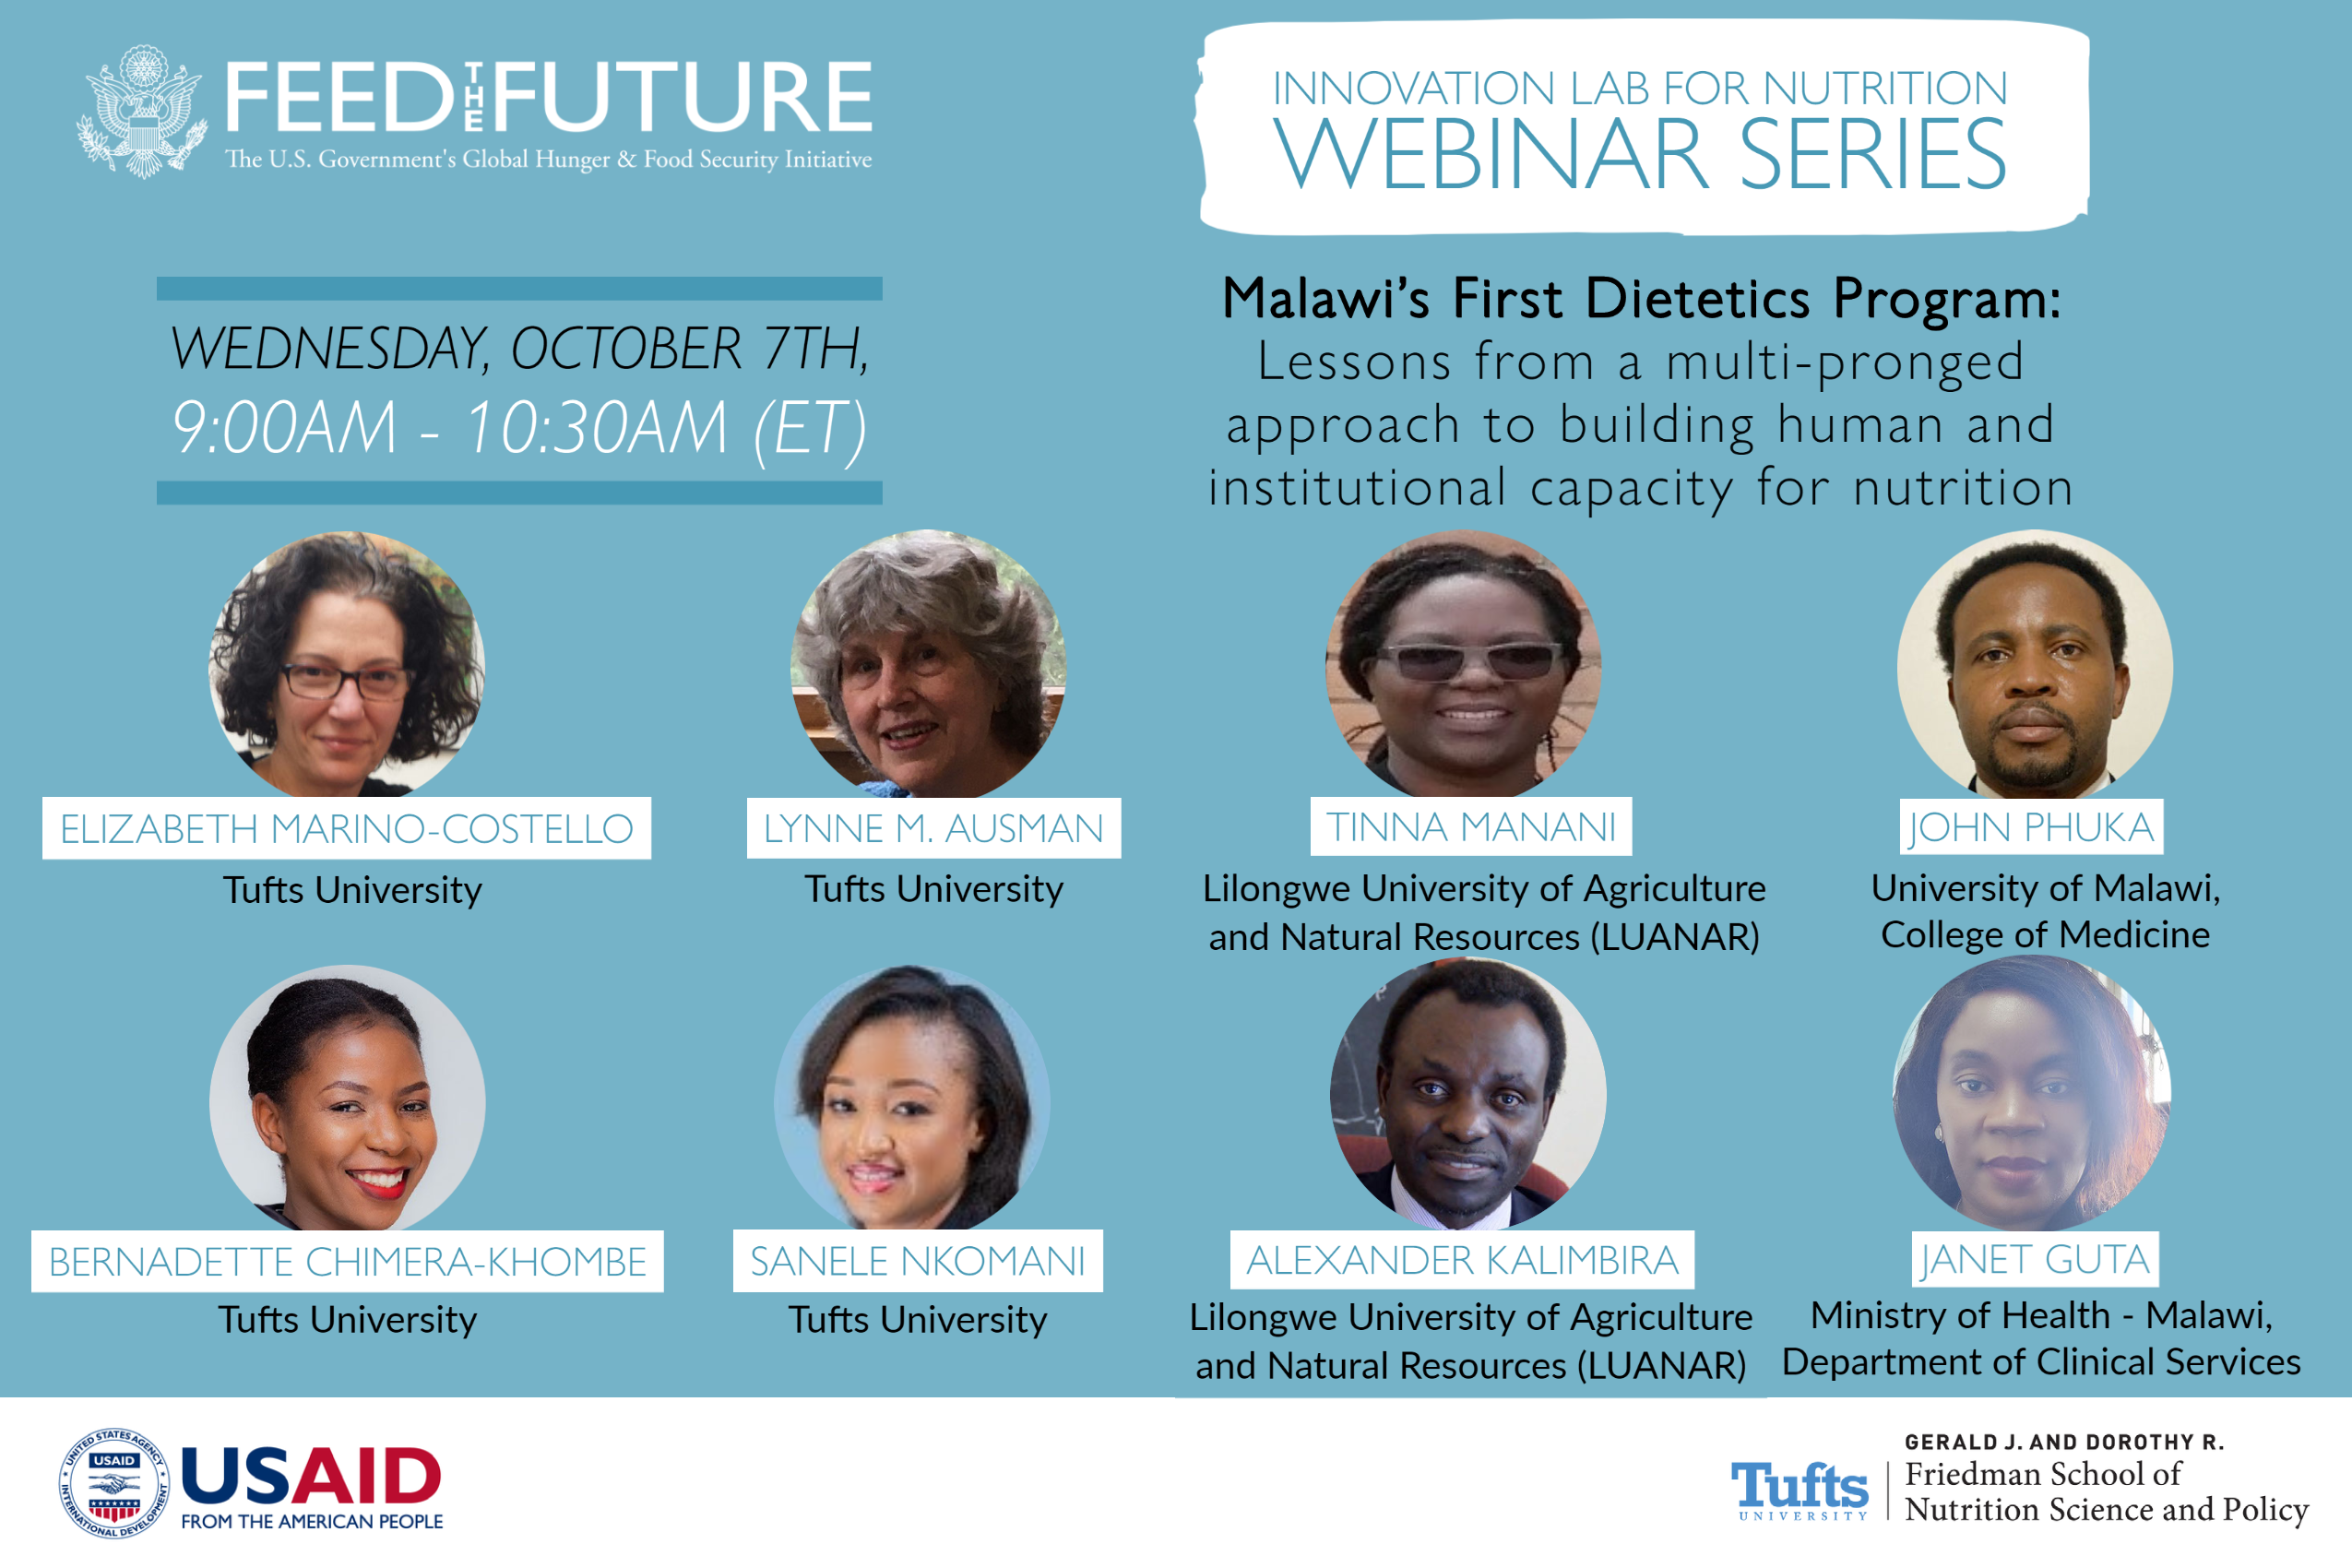 Feed the Future Webinar Series | Innovation Lab for Nutrition | USAID ...